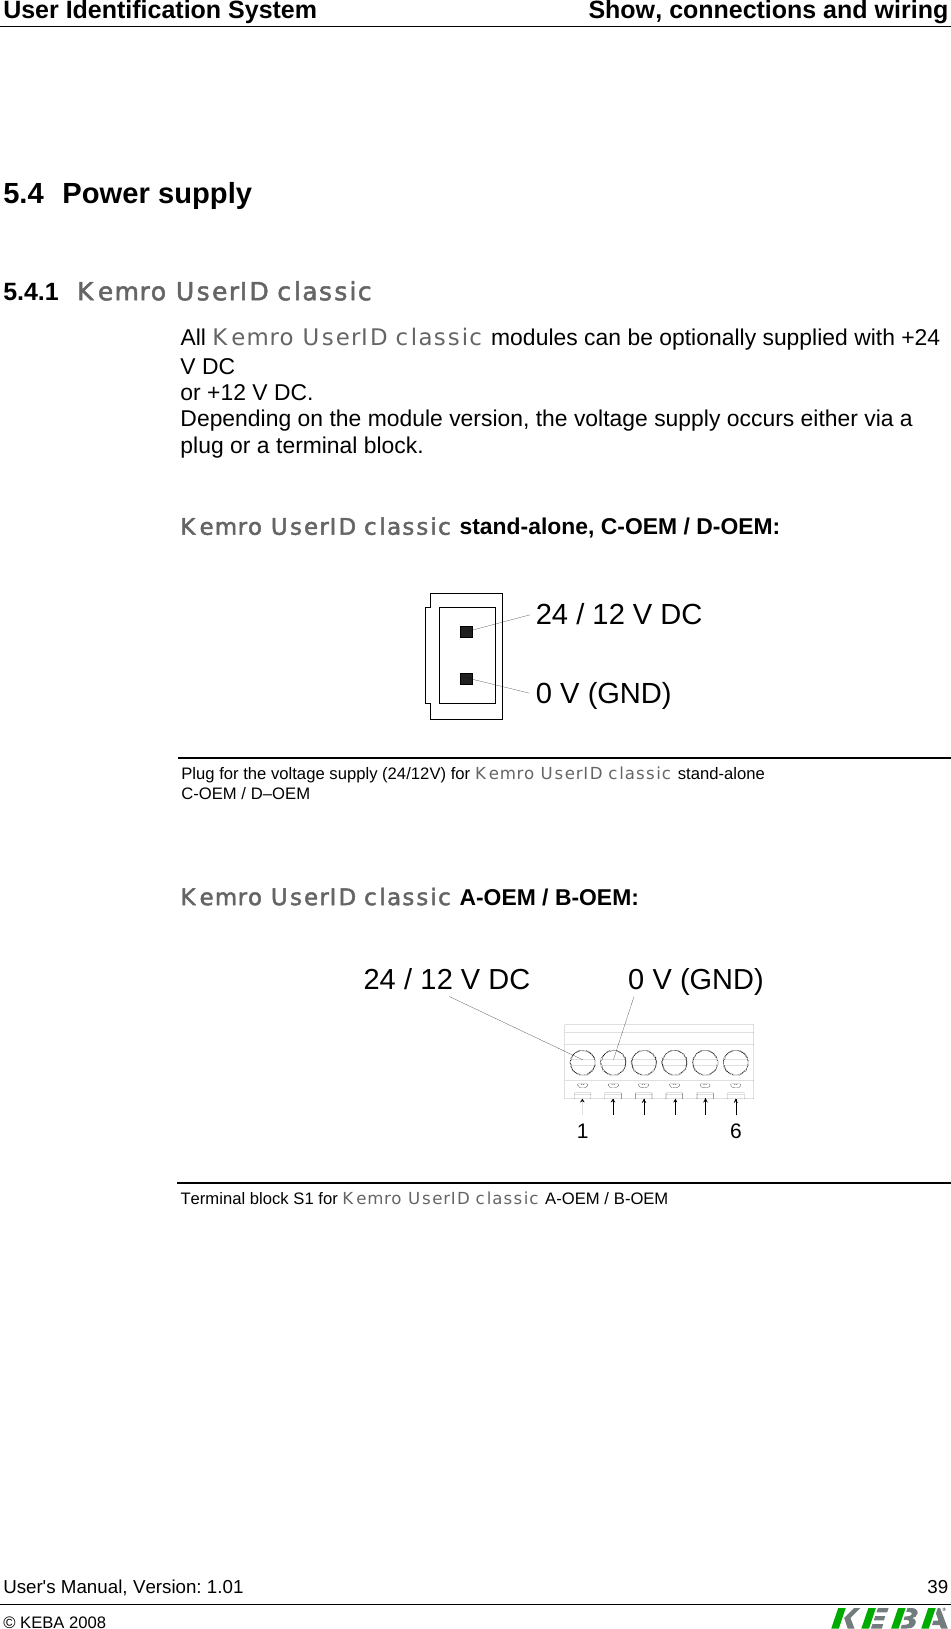 User Identification System  Show, connections and wiring User&apos;s Manual, Version: 1.01  39 © KEBA 2008   5.4 Power supply 5.4.1  Kemro UserID classic All Kemro UserID classic modules can be optionally supplied with +24 V DC  or +12 V DC.  Depending on the module version, the voltage supply occurs either via a plug or a terminal block.  Kemro UserID classic stand-alone, C-OEM / D-OEM:  24 / 12 V DC0 V (GND)  Plug for the voltage supply (24/12V) for Kemro UserID classic stand-alone C-OEM / D–OEM  Kemro UserID classic A-OEM / B-OEM:  1624 / 12 V DC 0 V (GND) Terminal block S1 for Kemro UserID classic A-OEM / B-OEM   